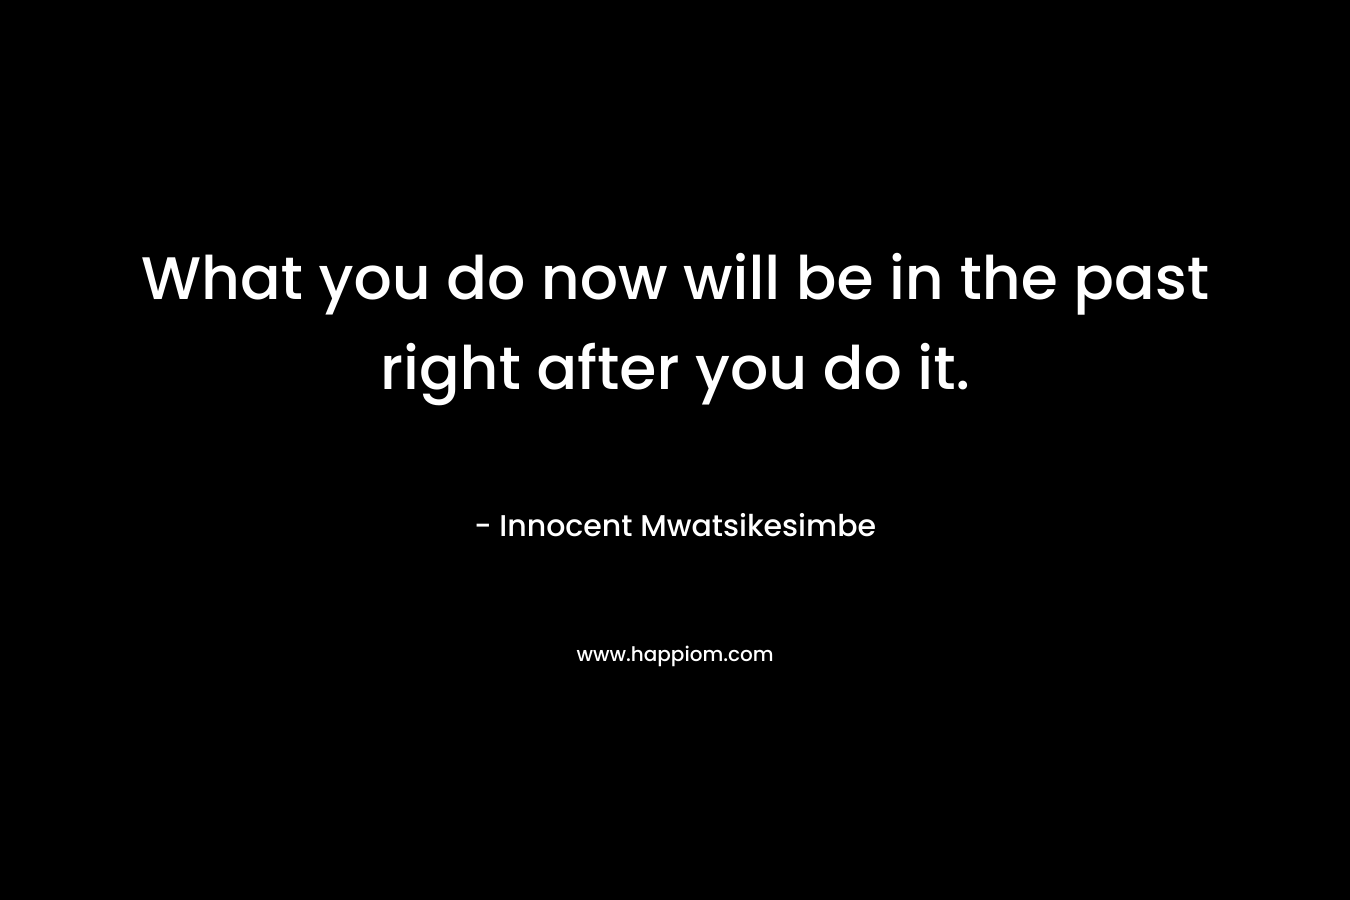 What you do now will be in the past right after you do it.